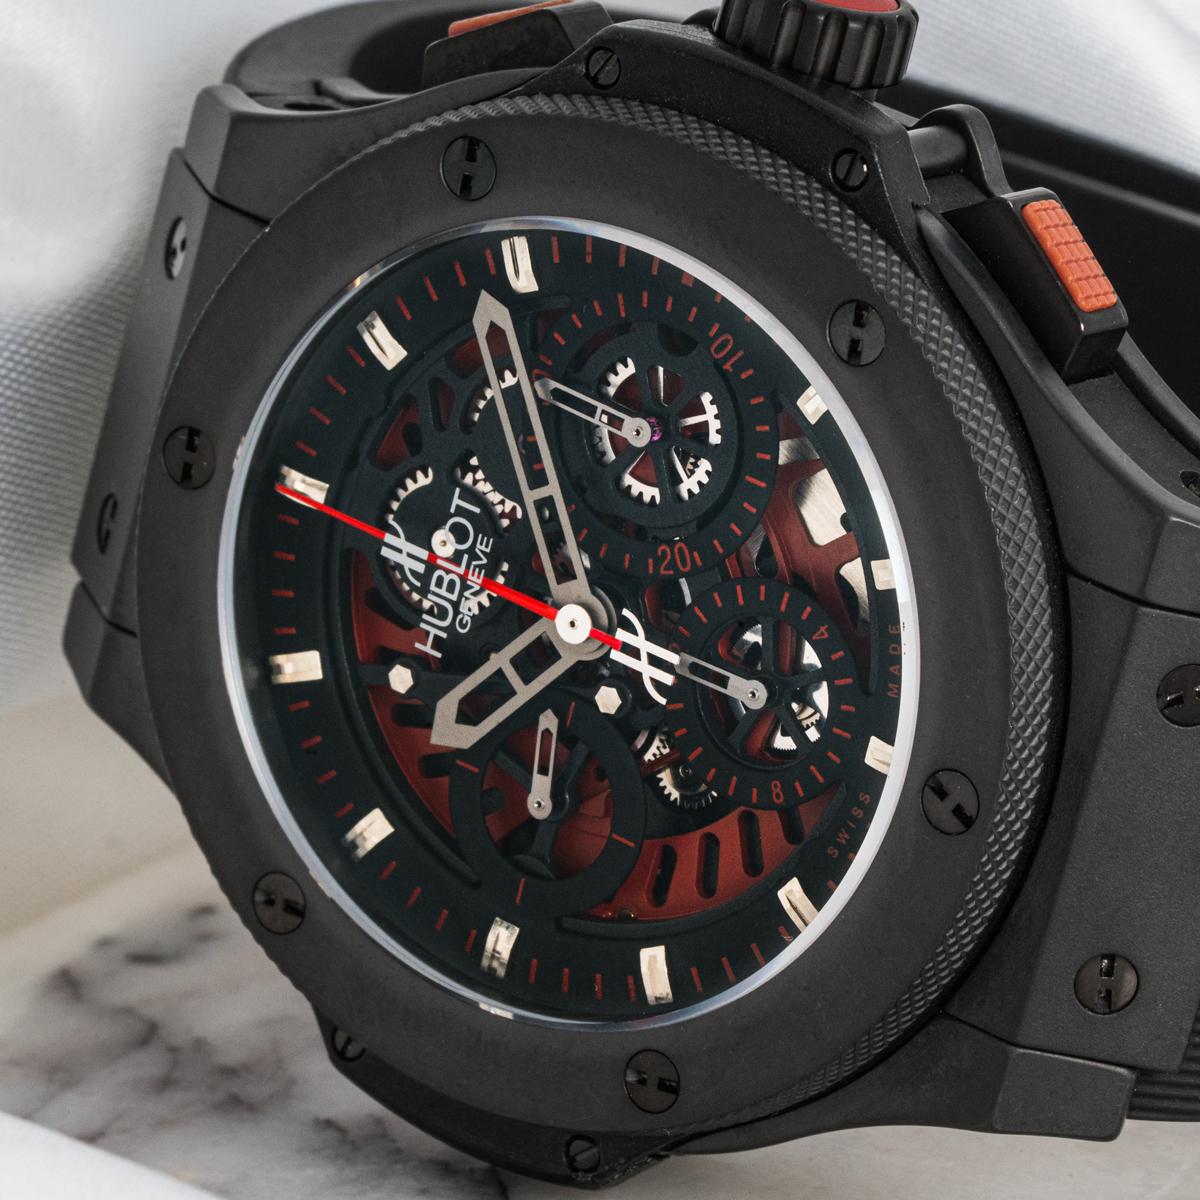 A limited edition Big Bang Aero wristwatch crafted in ceramic by Hublot. Featuring a stunning black red skeleton dial with chronograph counters and a ceramic bezel.

Fitted with a sapphire glass and a self-winding automatic movement, which can be